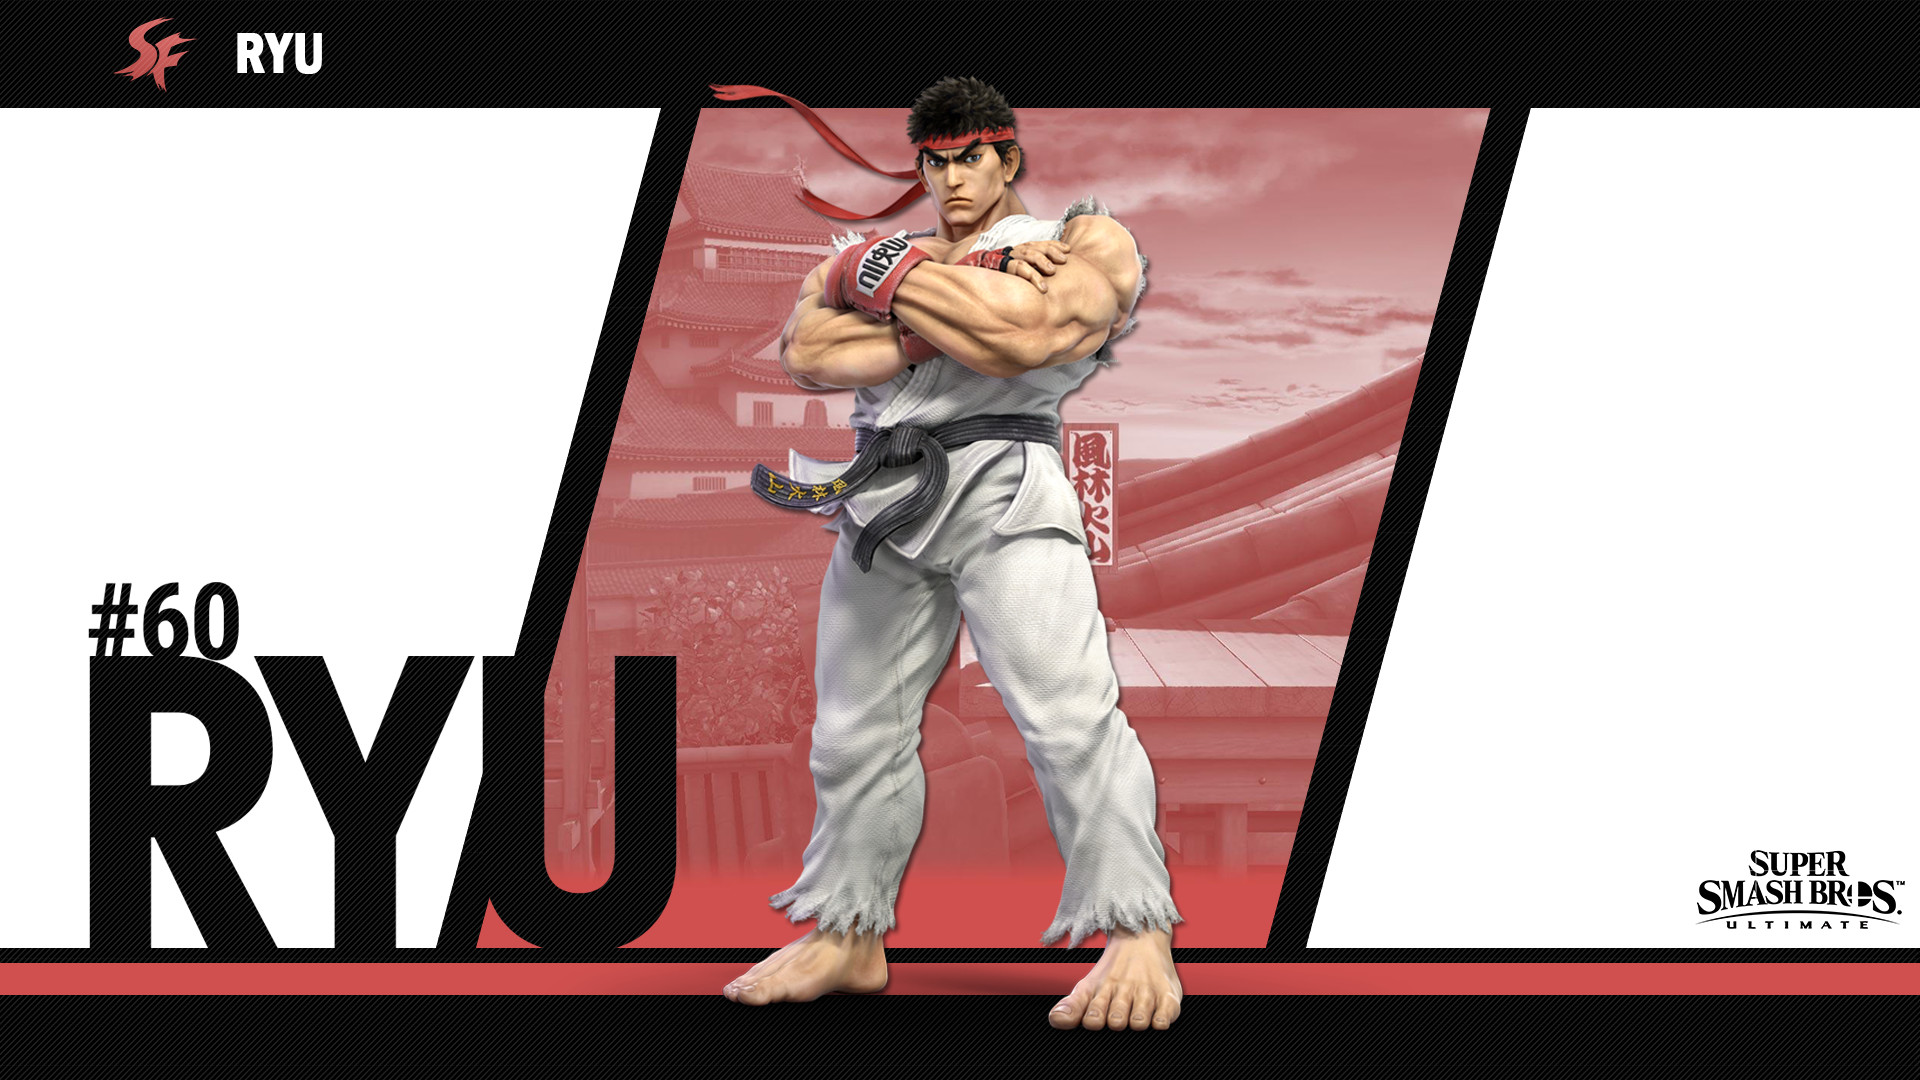 1920x1080 Wallpaper Of Ryu From Super Smash Bros. Ultimate